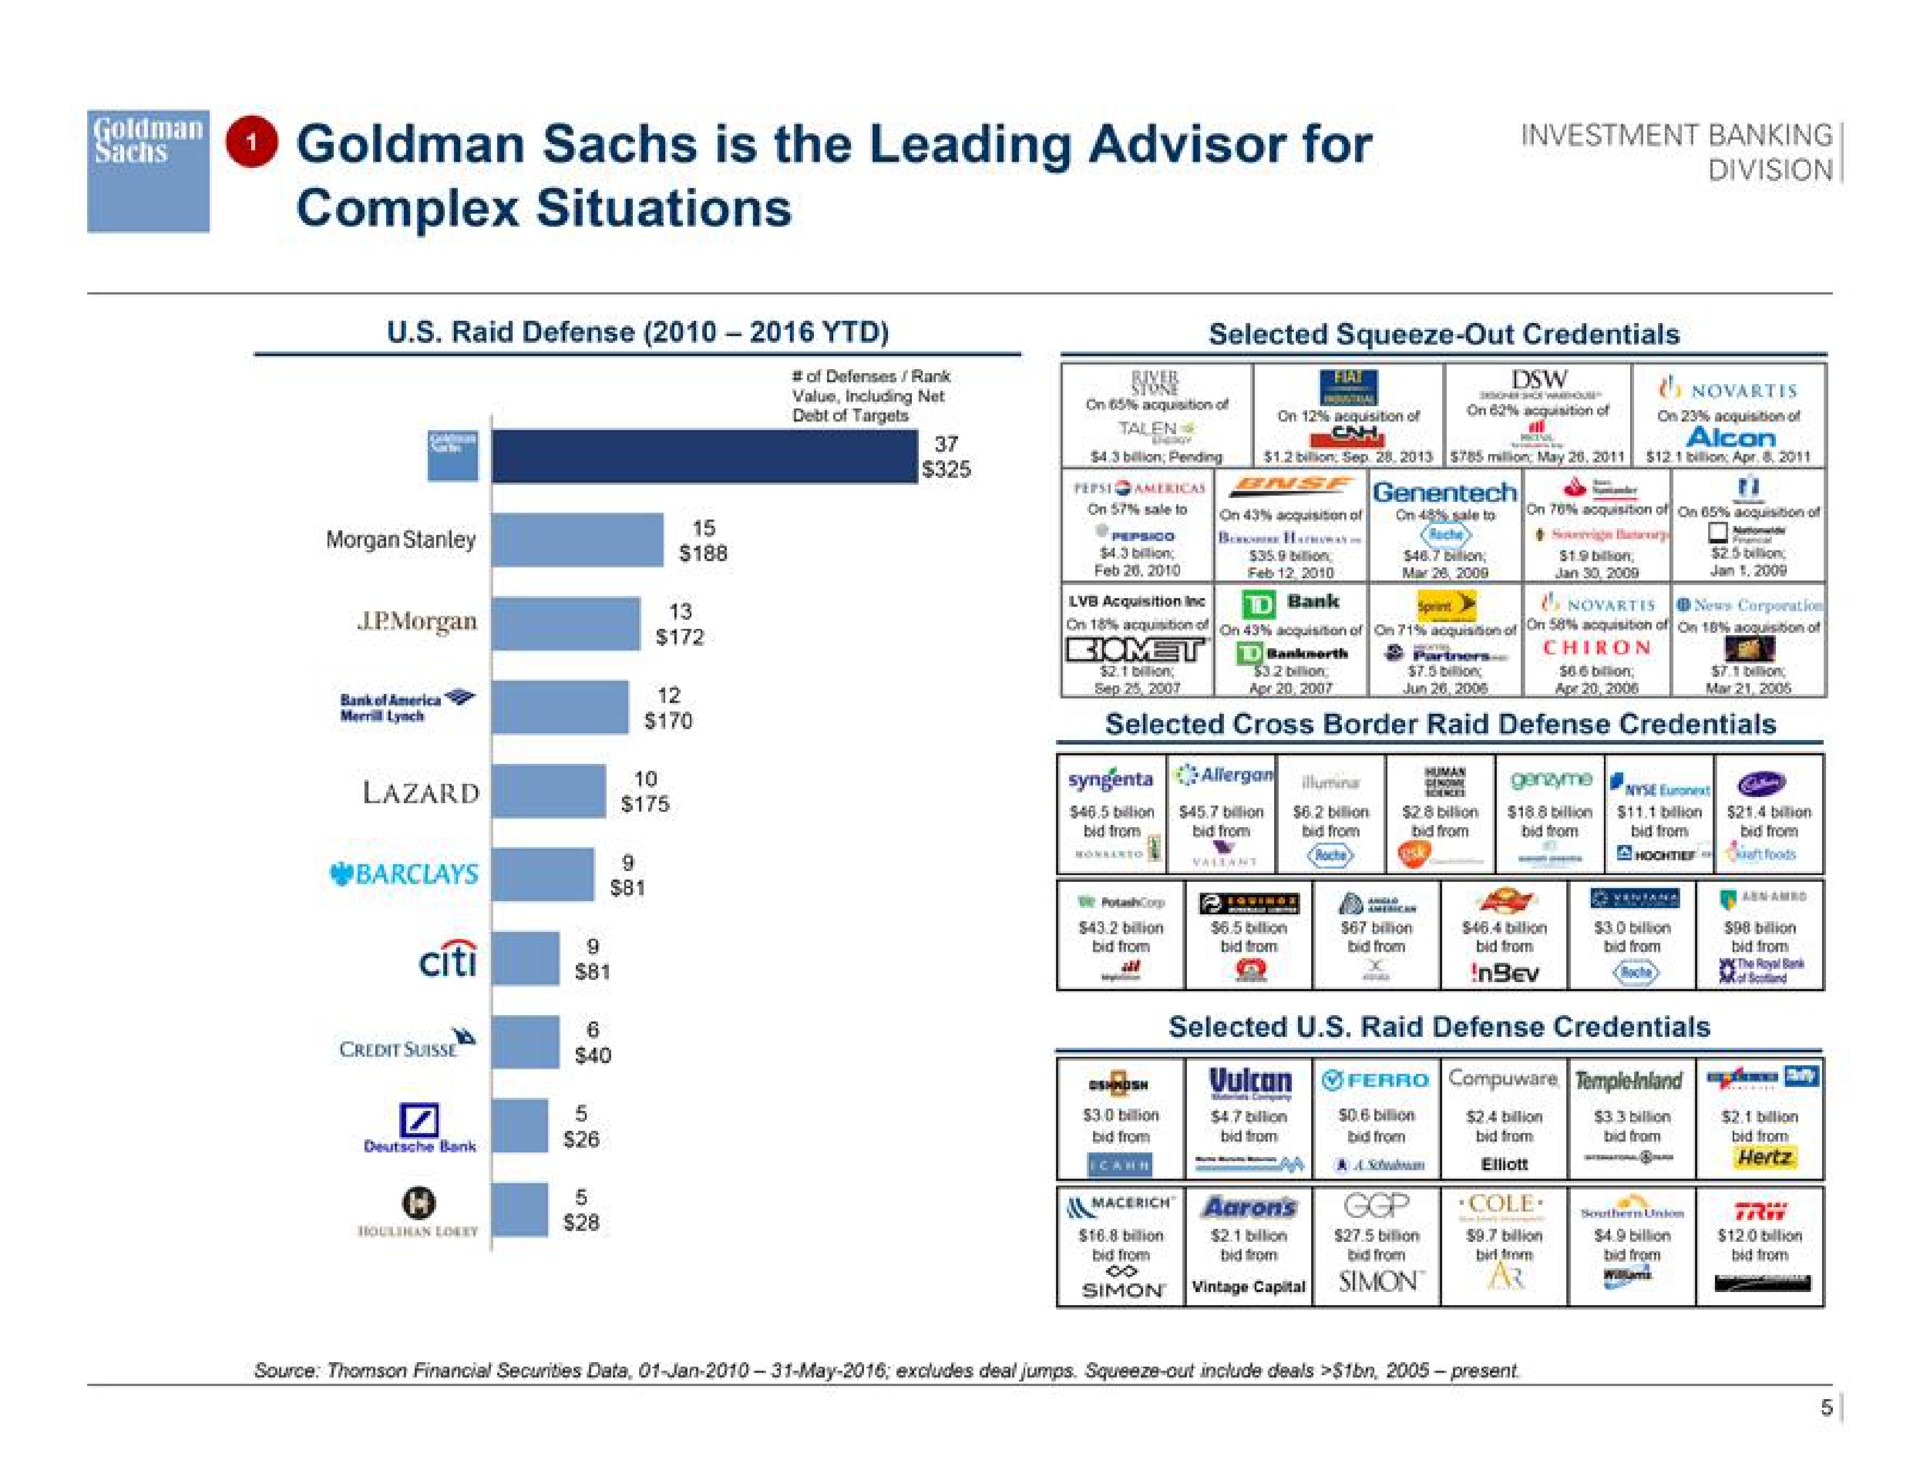 is the leading advisor for complex situations a | Goldman Sachs